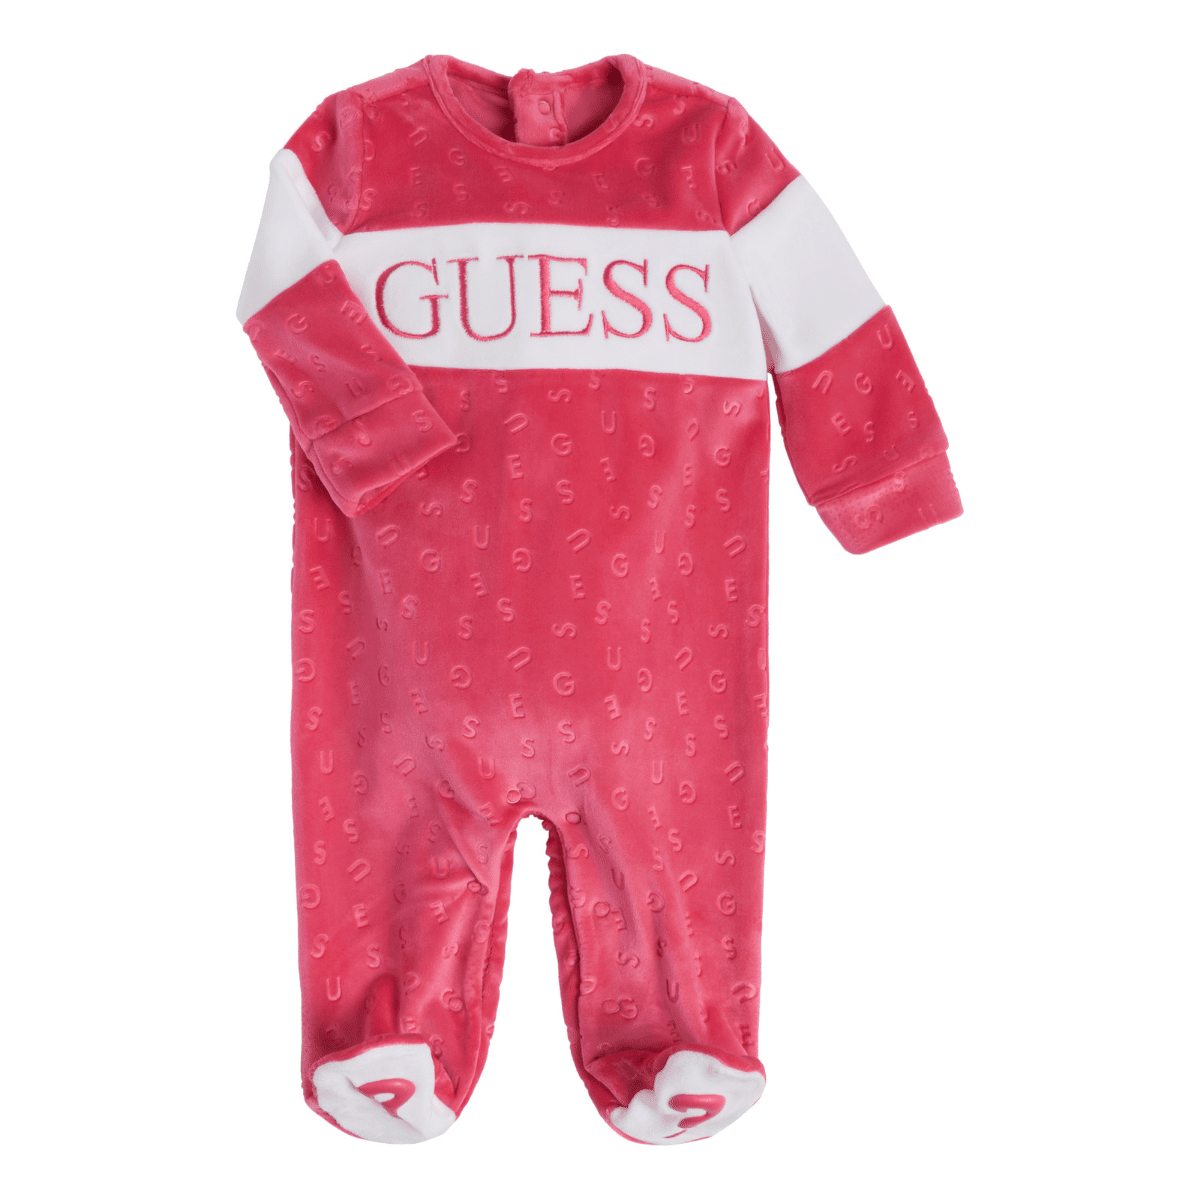 Guess baby red chenille babygro